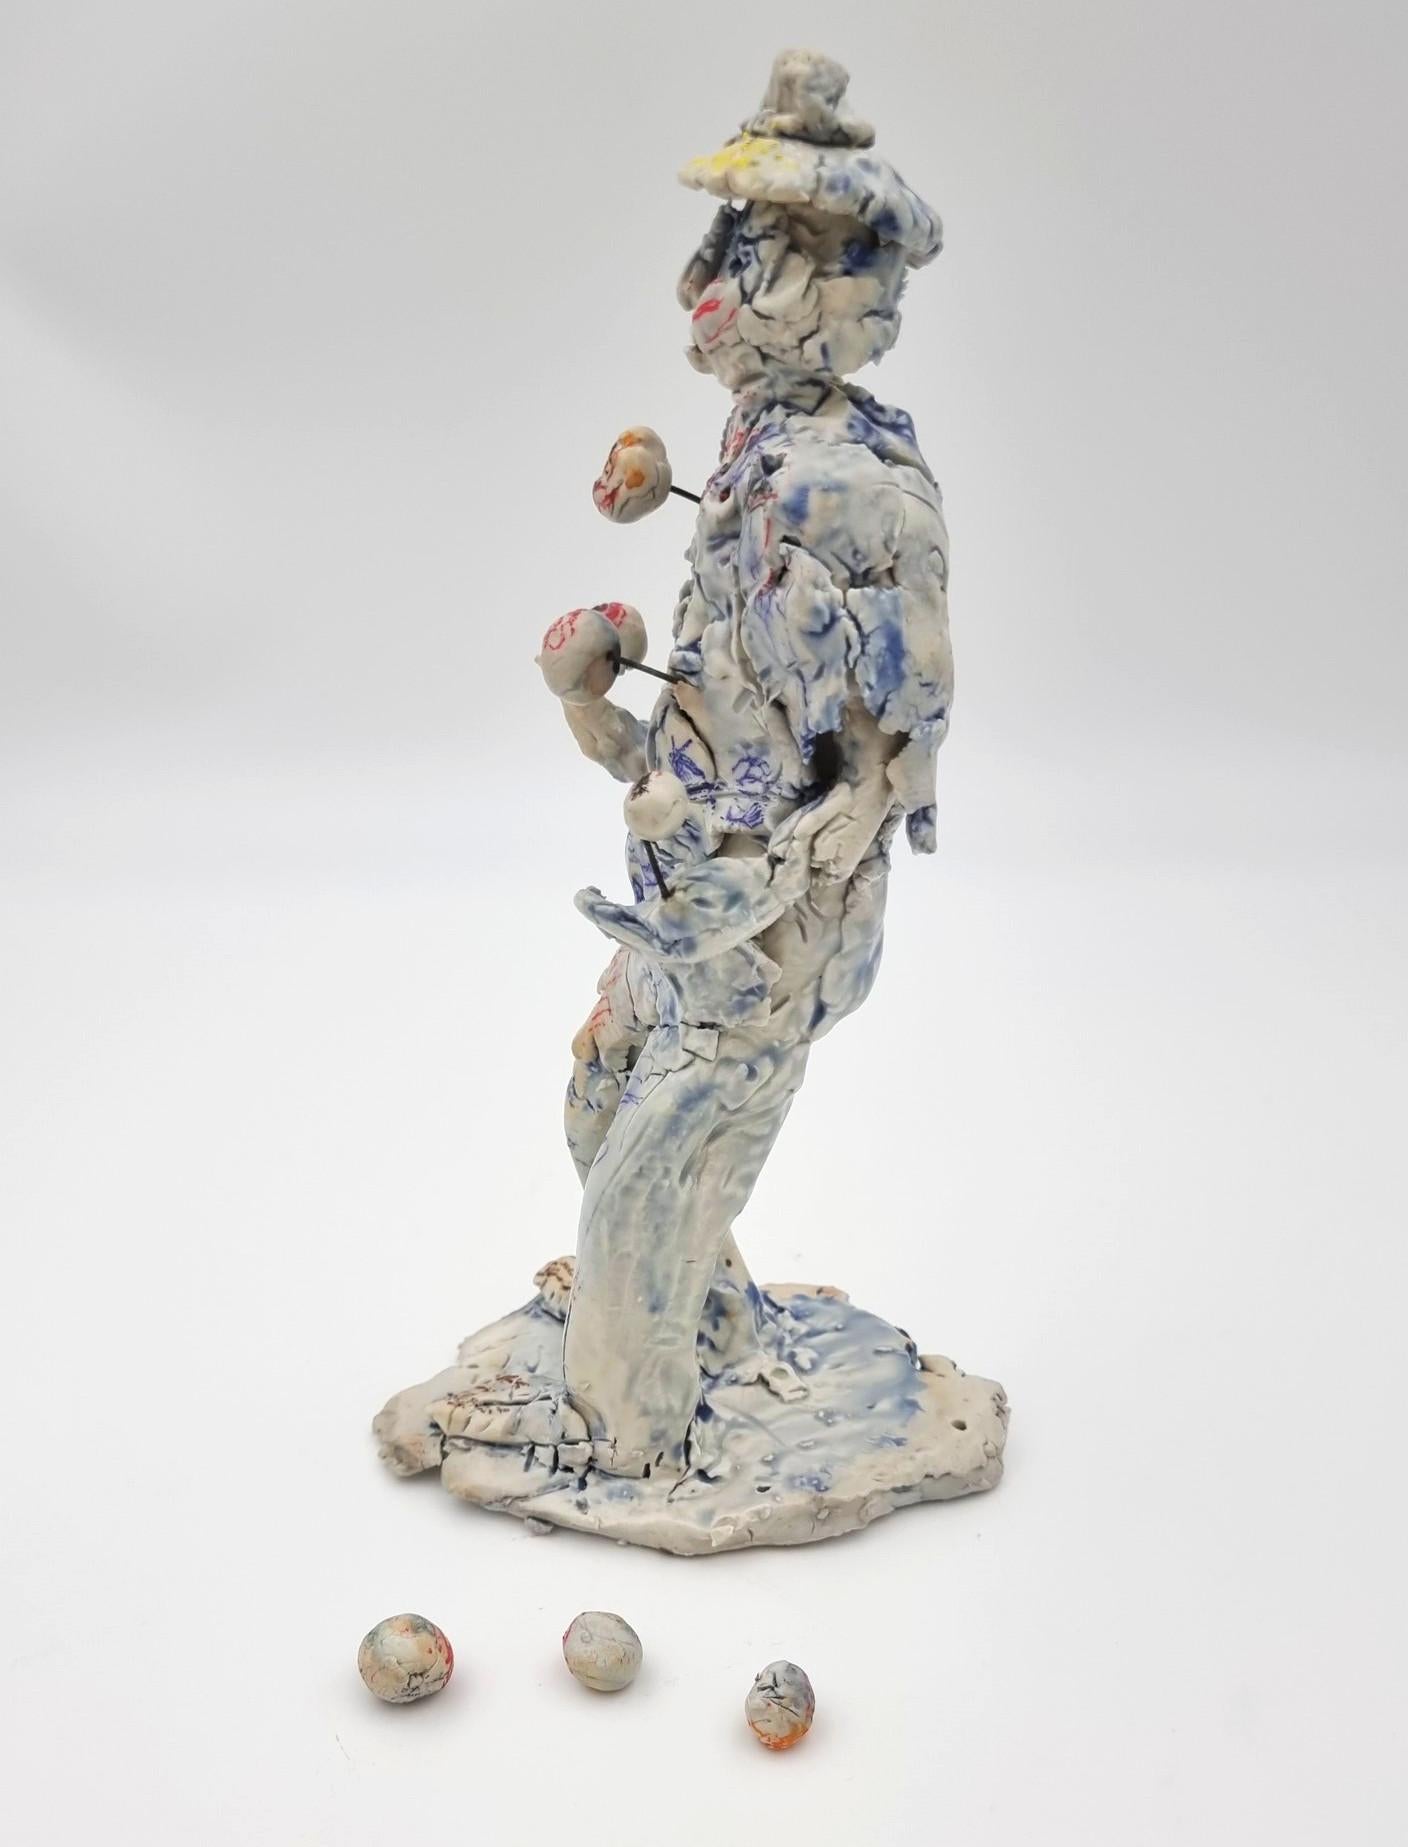 Ann Rothman
Juggler (Circus, Whimsical, Viola Frey, Delicate, Playful, Fun, Cirque du Soleil, The Ringling Bros., Barnum & Bailey)
2021
Porcelain, Low Fire Glazes, Crayons, Watercolors
Fired Cone 06, 04
10 x 3.5 x 5 inches
COA provided
Ref.: